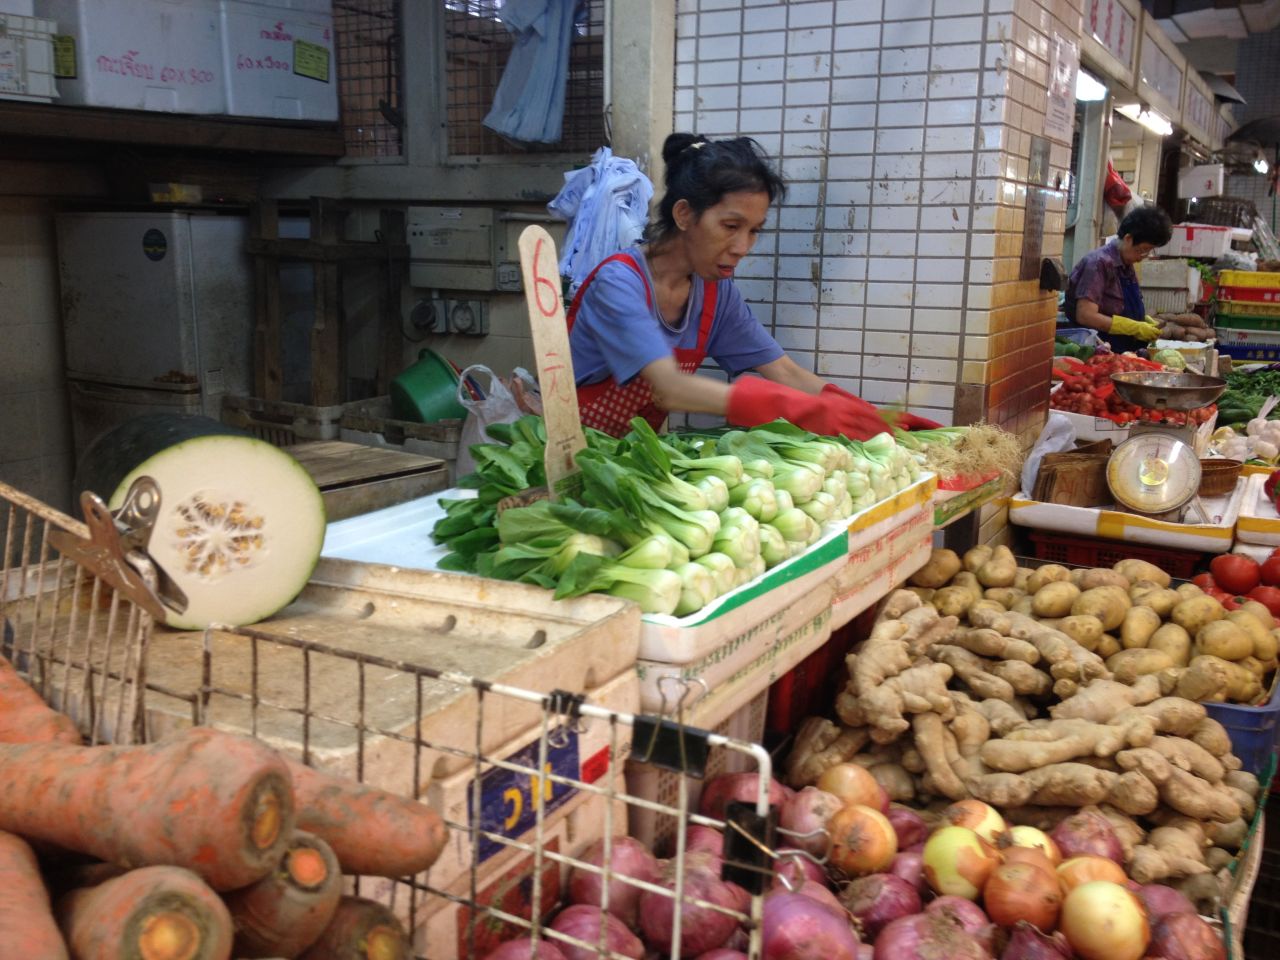 Carmen, 56, works at a vegetable stall she inherited from her mother when she died in 1999. She said that after the handover to China, the rules became stricter and outdoor vendors had to move indoors. Business isn't as strong inside, she said.